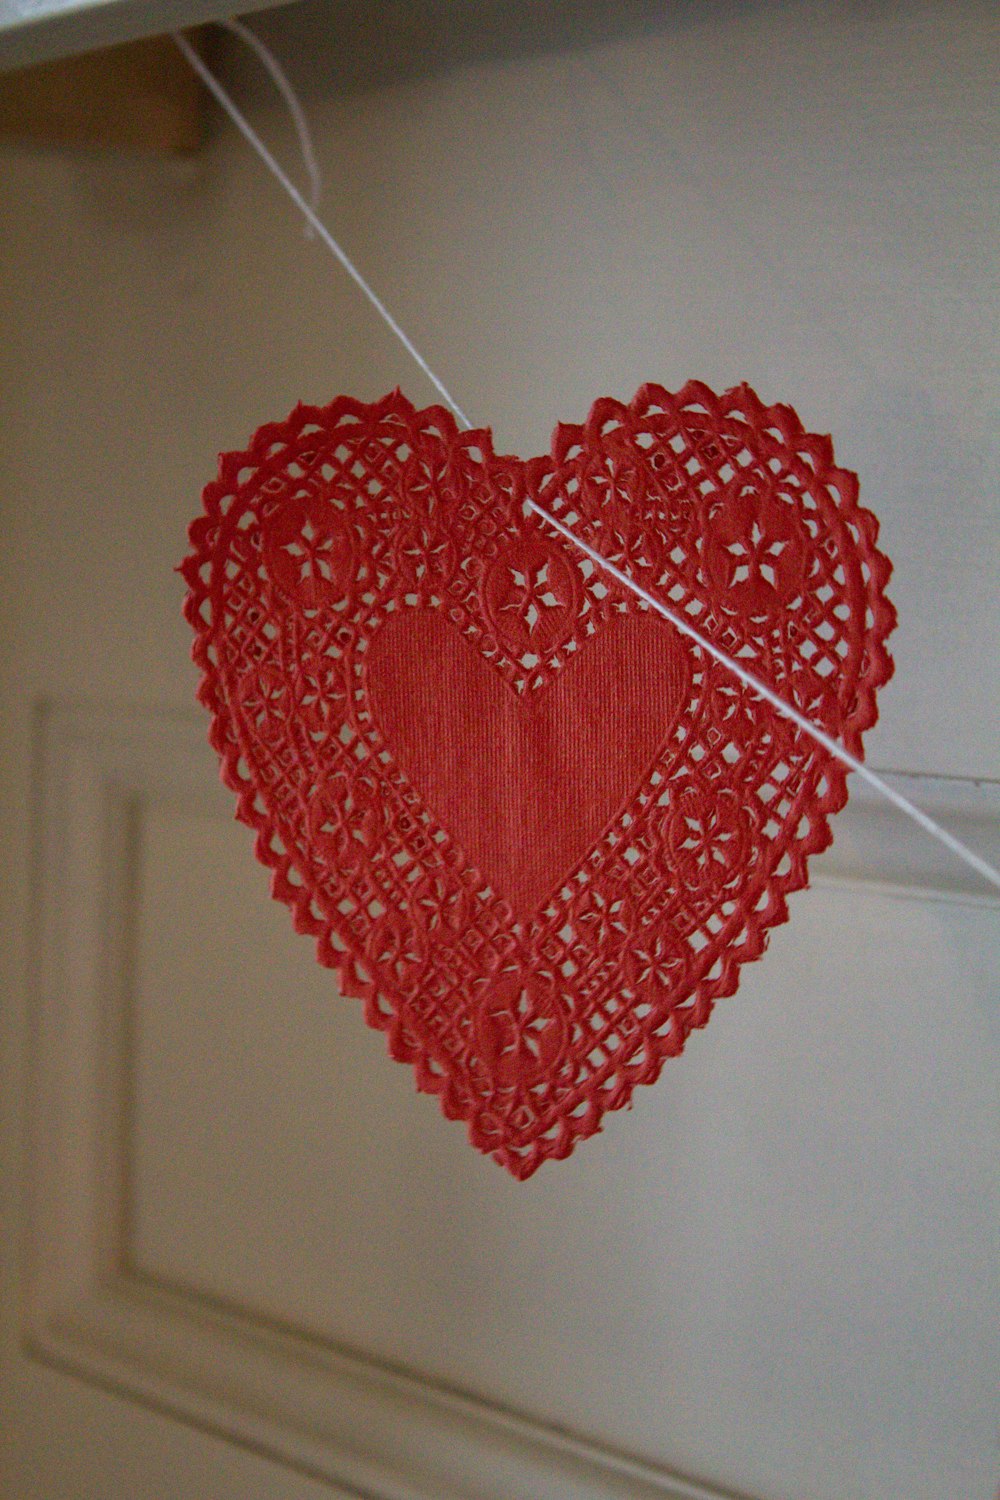 a red heart hanging from a string on a door